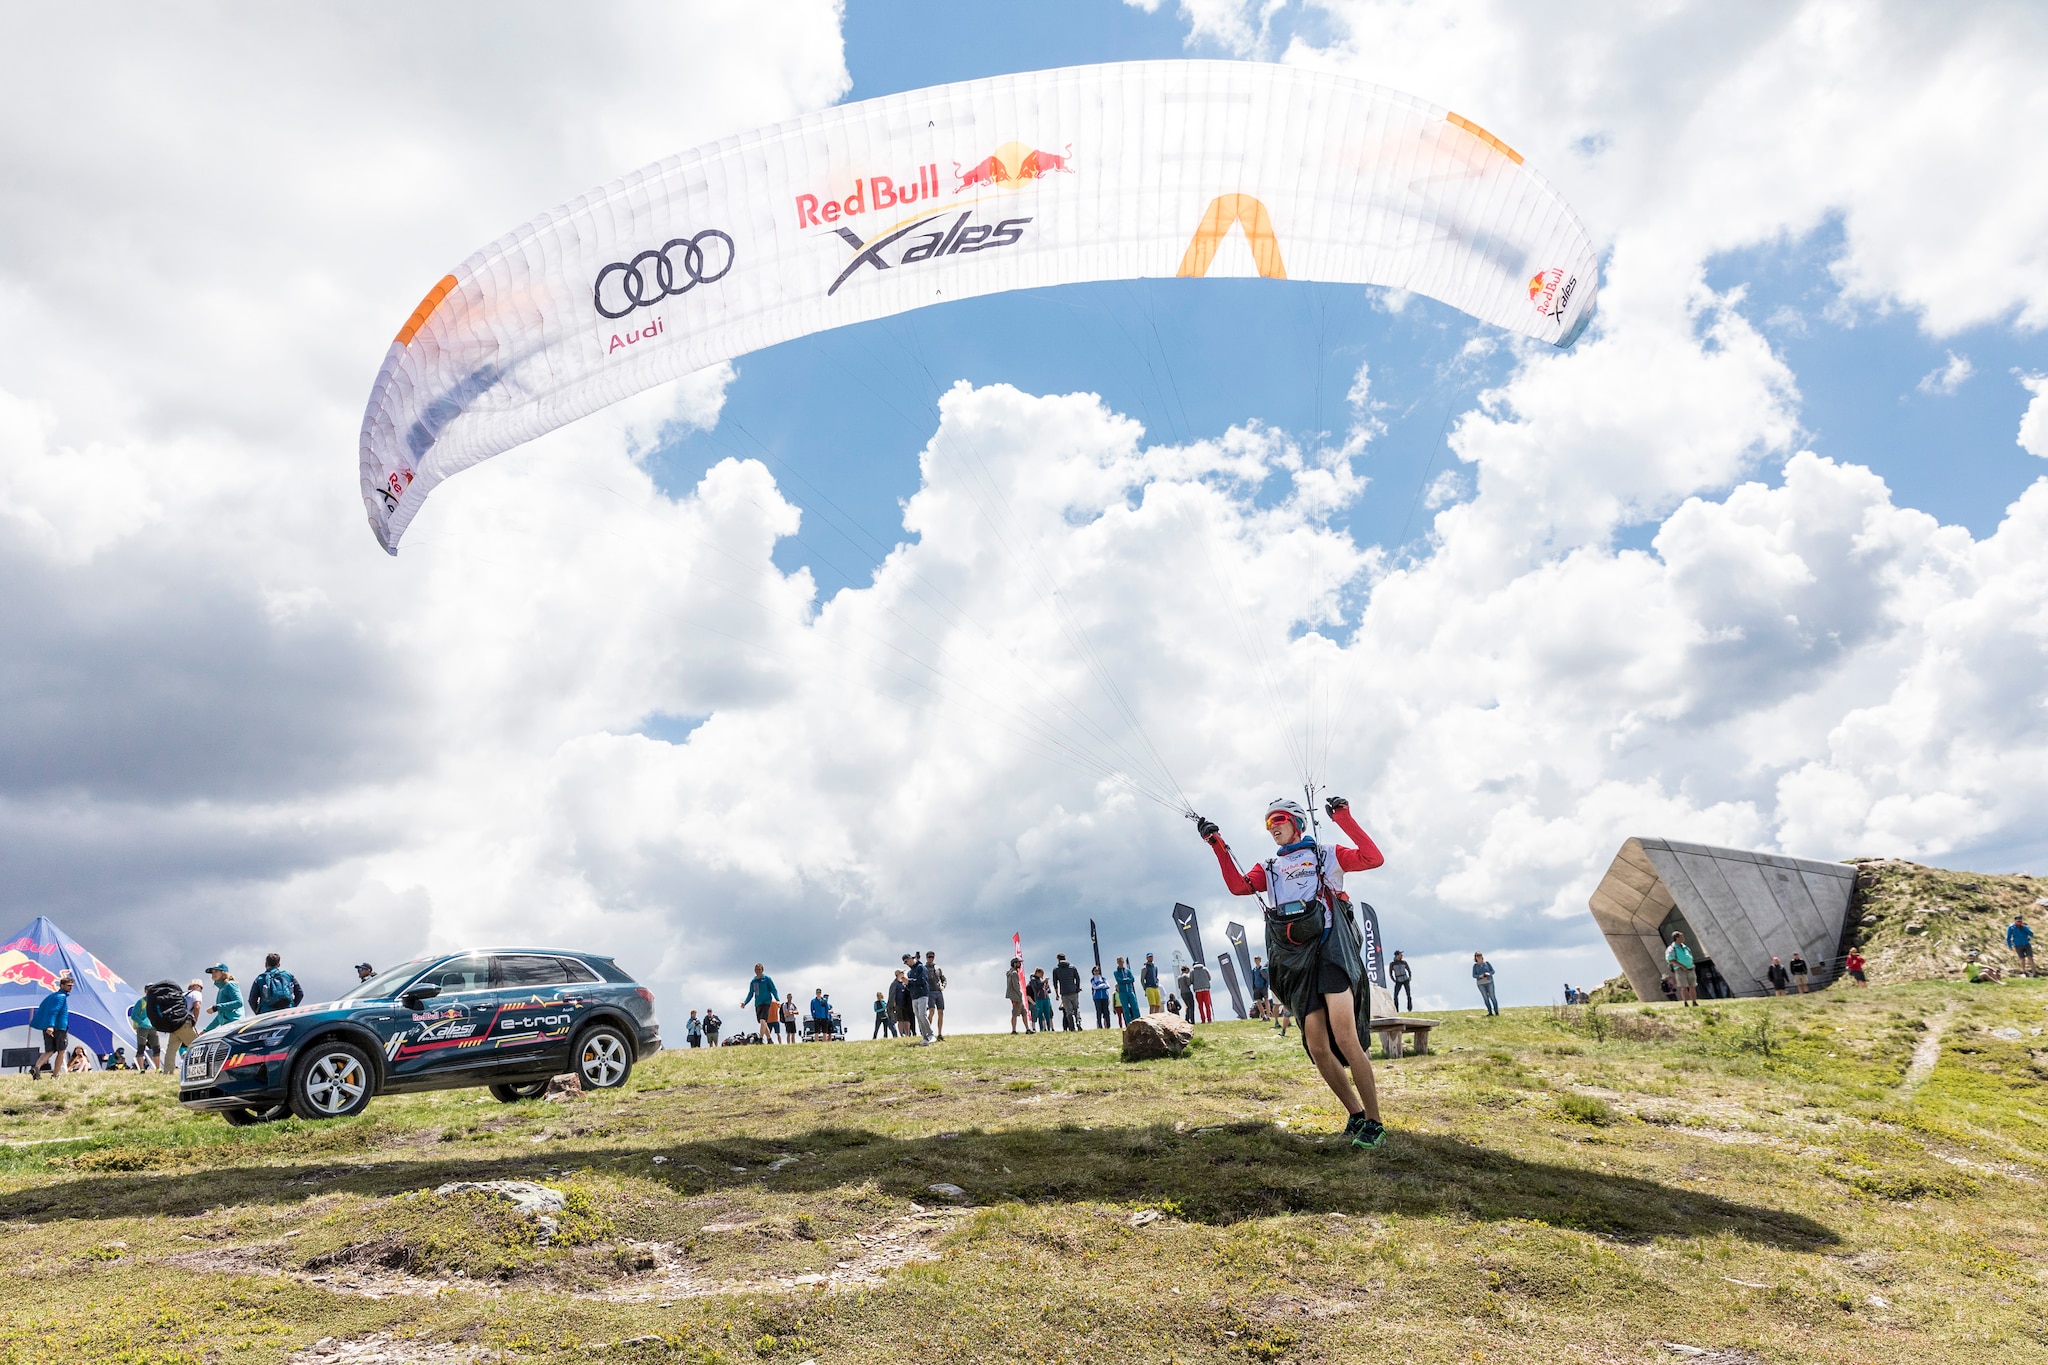 Turnpoint 4 during the Red Bull X-Alps at Kronplatz, Italy on June 18, 2019